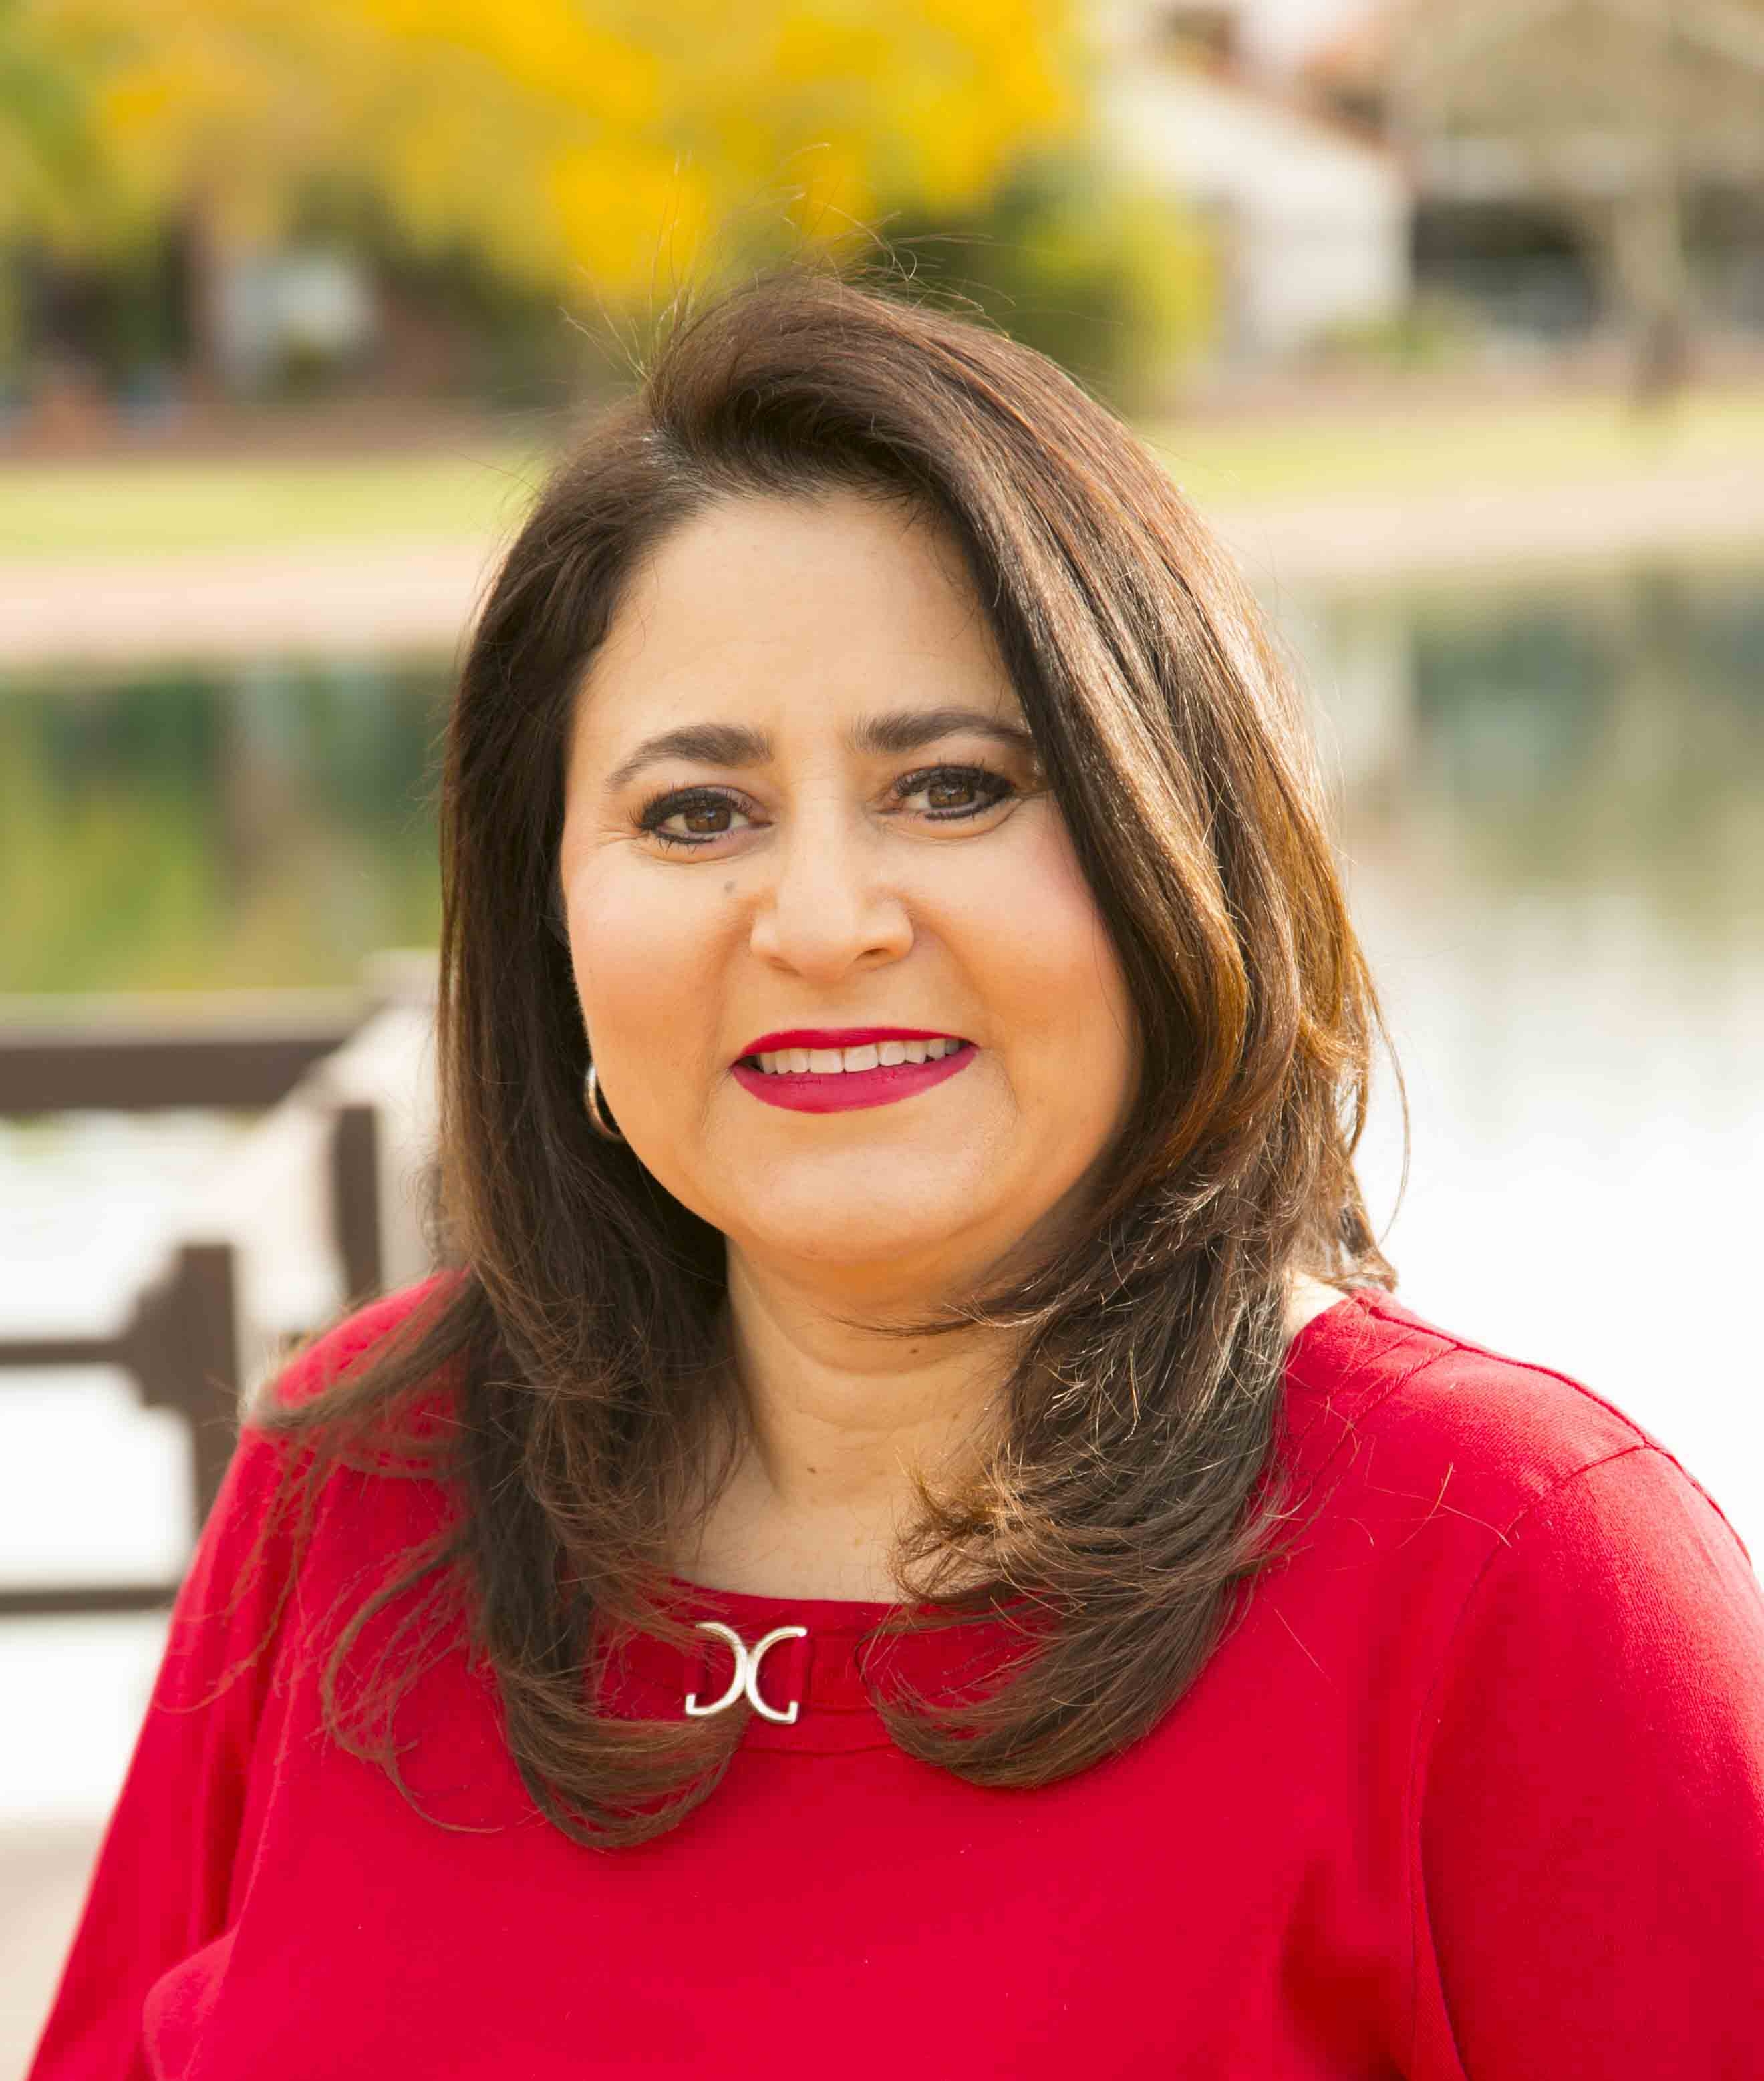 Governor Ducey Appoints Tucsonan Lea Marquez Peterson To The Arizona Corporation Commission